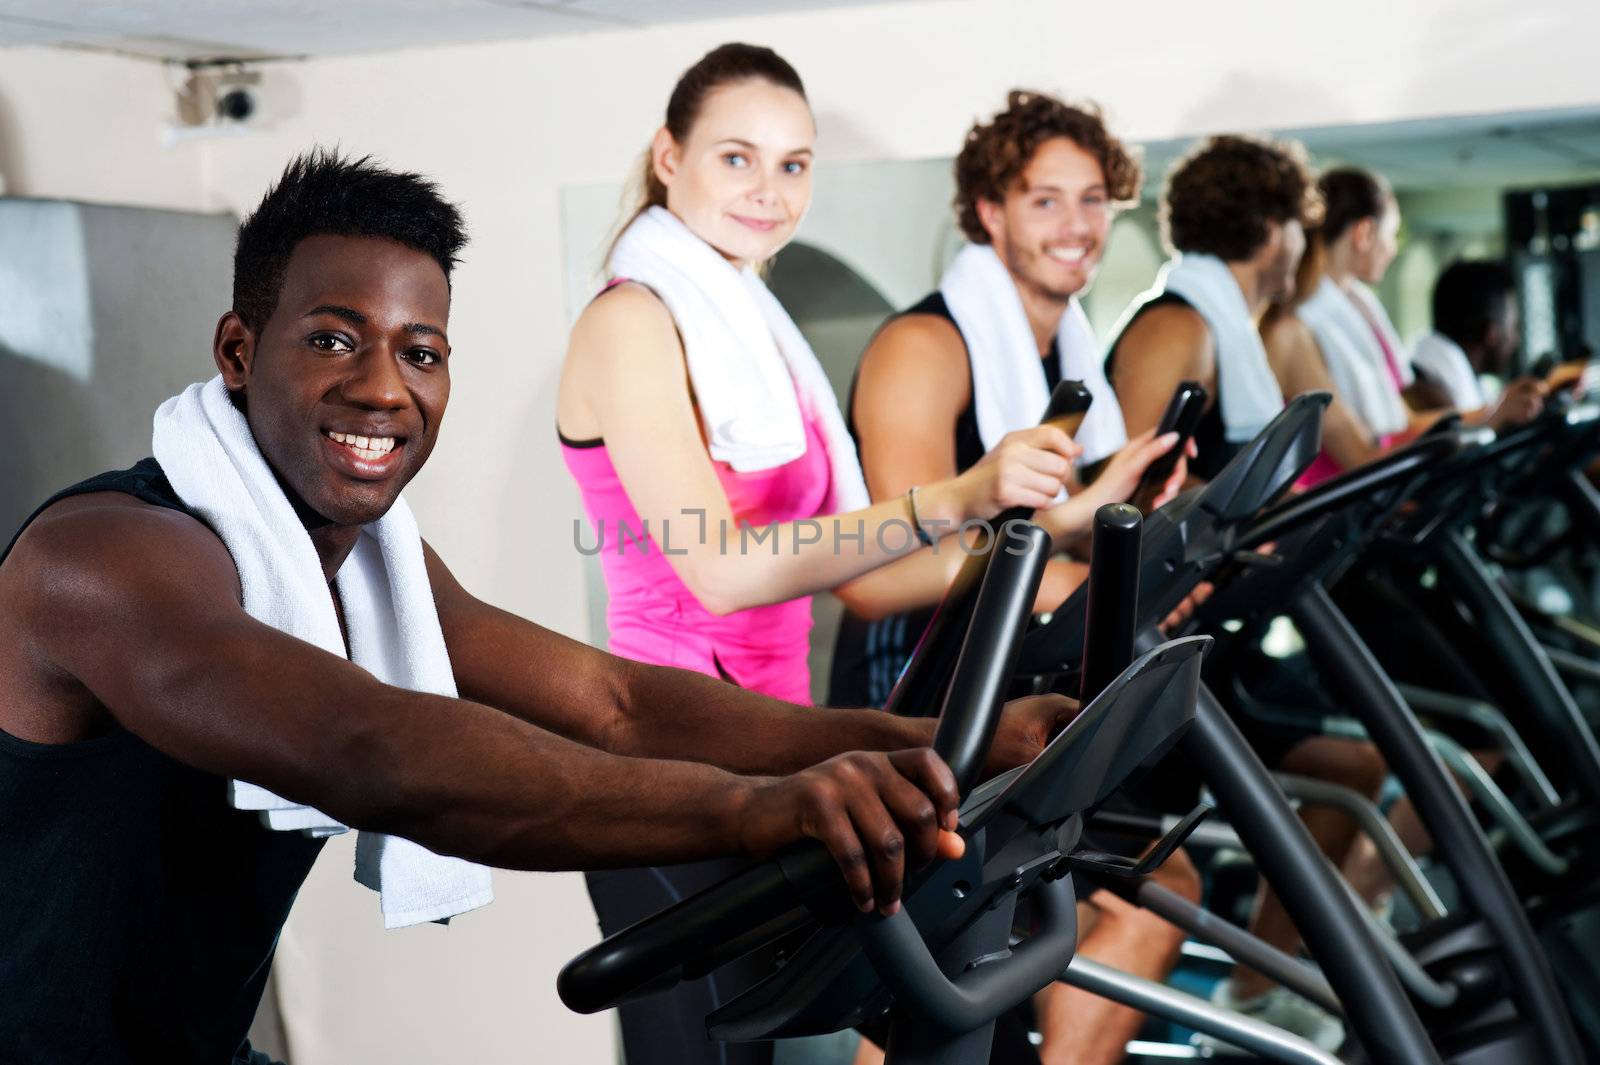 Energetic group working out together in a gym on elliptical